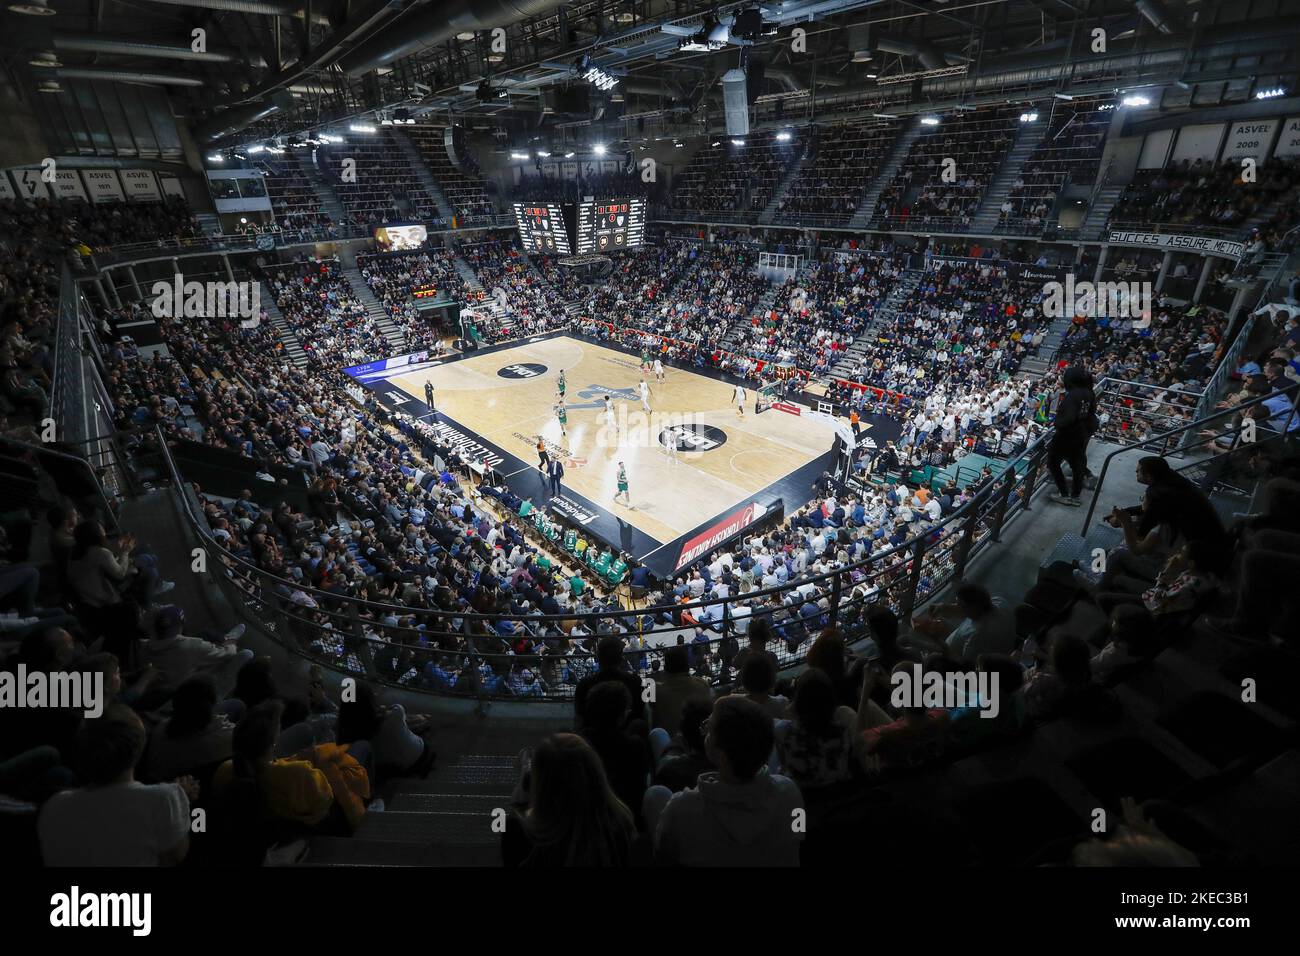 General view of Astroball during the Turkish Airlines Euroleague basketball  match between LDLC ASVEL Villeurbanne and